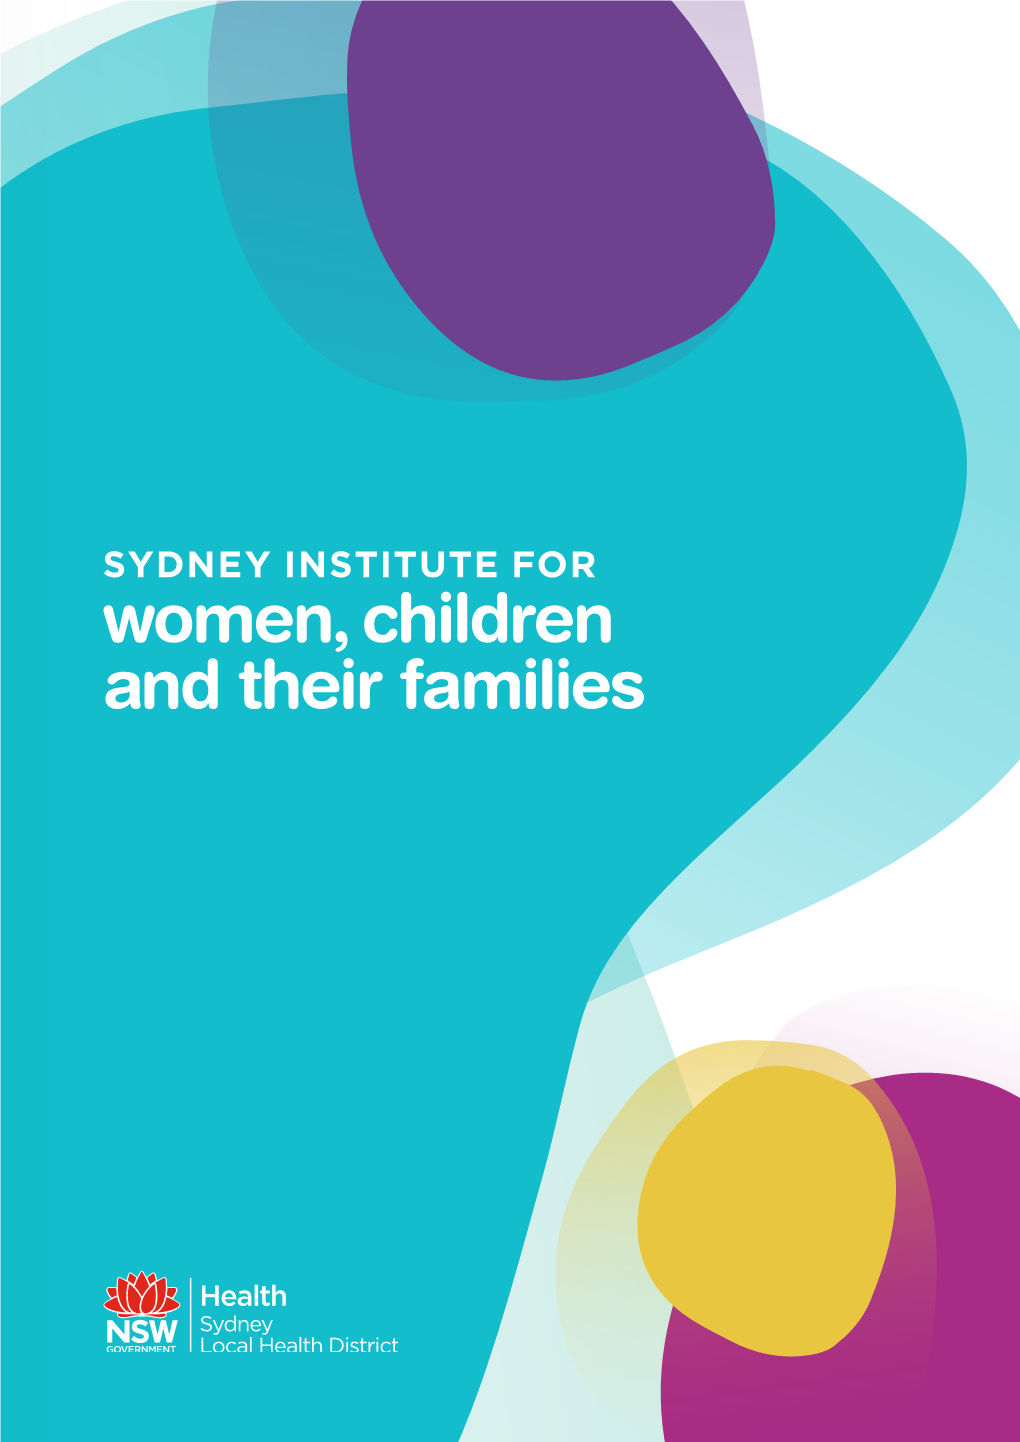 Sydney Institute for Women, Children and Their Families